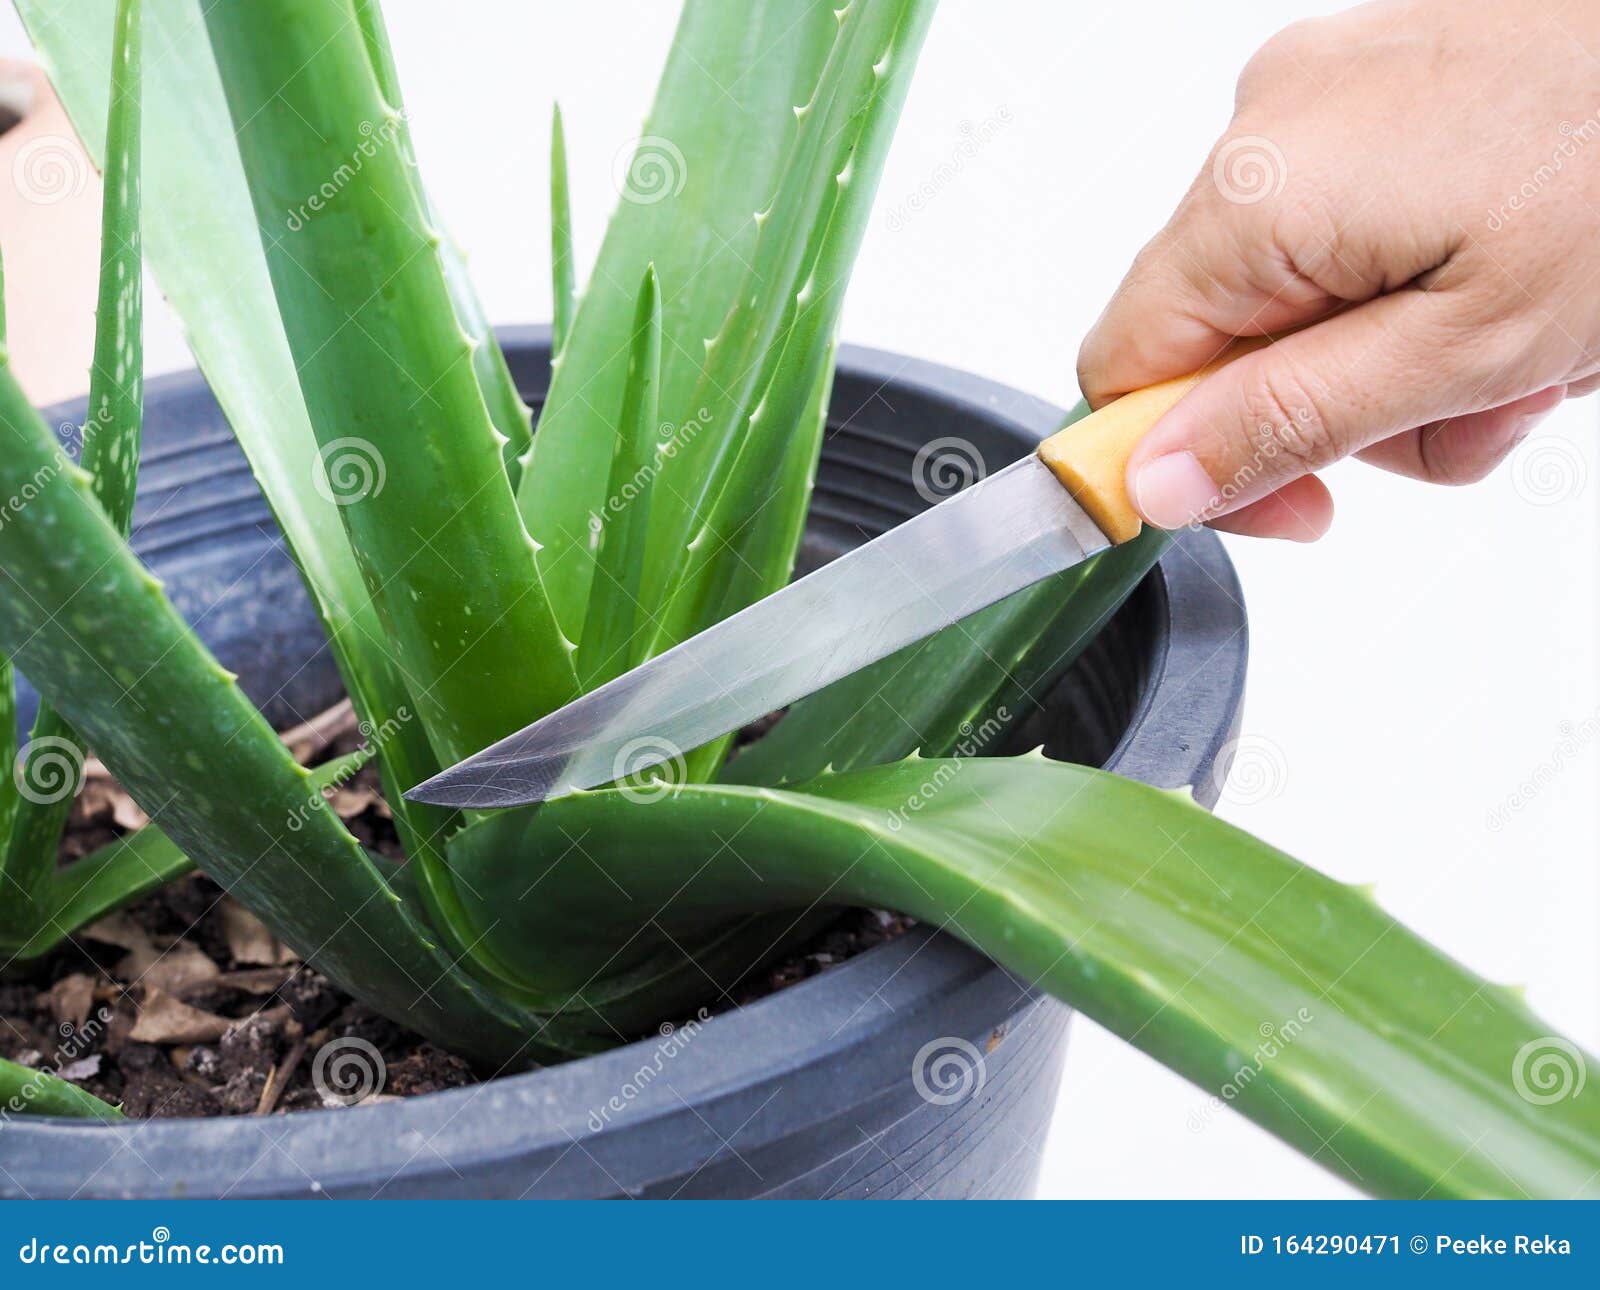 Knife In Hand To Cut Leaves Of Aloe Vera Tree In Black Pot Stock